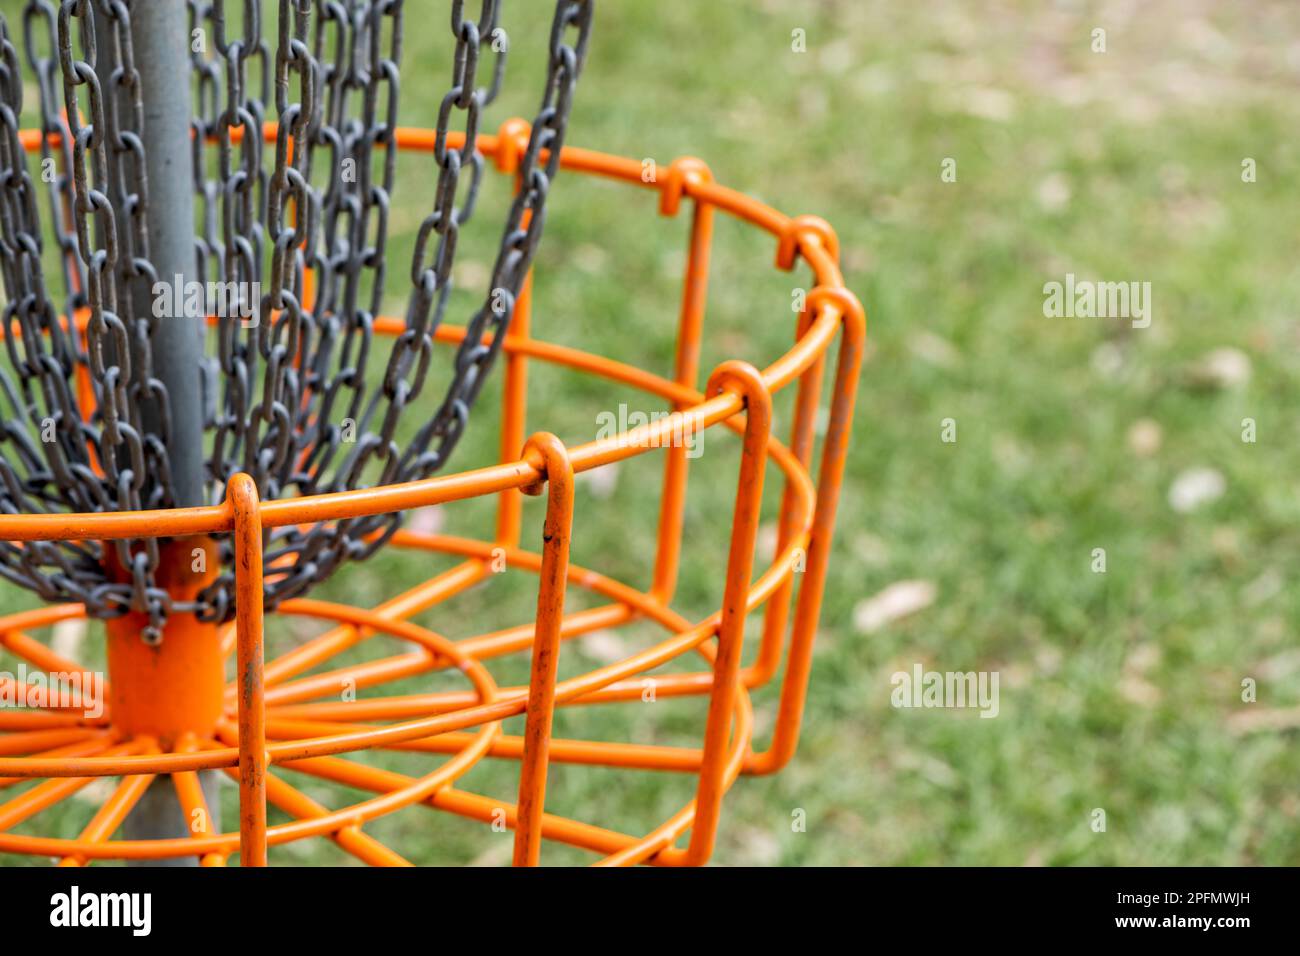 Closeup of metal disc golf basket with a shallow depth of field Stock Photo